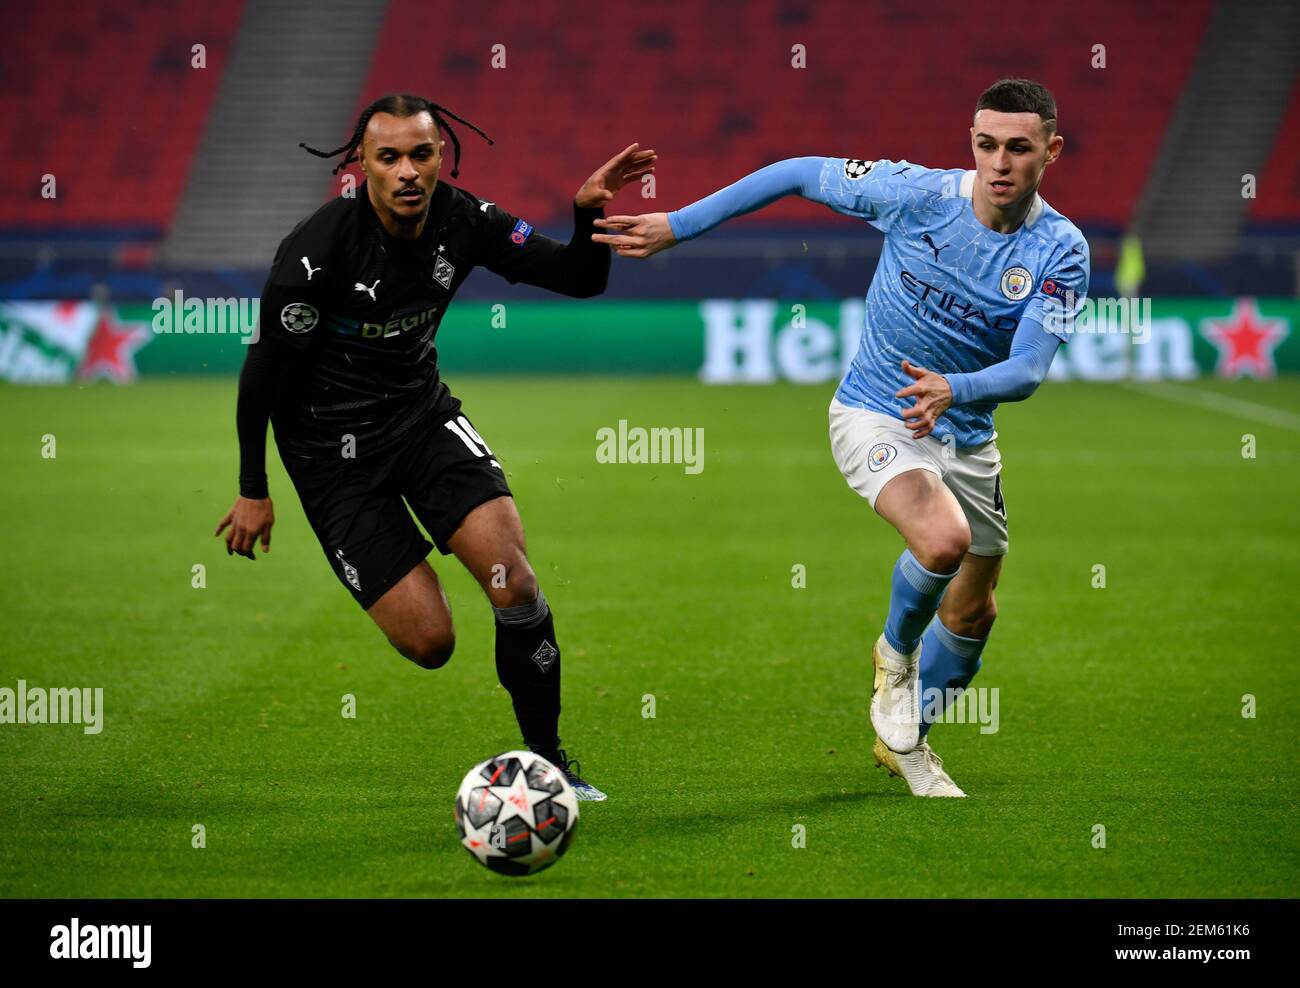 Budapest, Hungary. 24th Feb, 2021. Football: Champions League, Borussia Mönchengladbach - Manchester City, knockout round, round of 16, first leg at Puskas Arena. Gladbach's Valentino Lazaro and Manchester City's Phil Foden (r) in action. Credit: Marton Monus/dpa/Alamy Live News Stock Photo